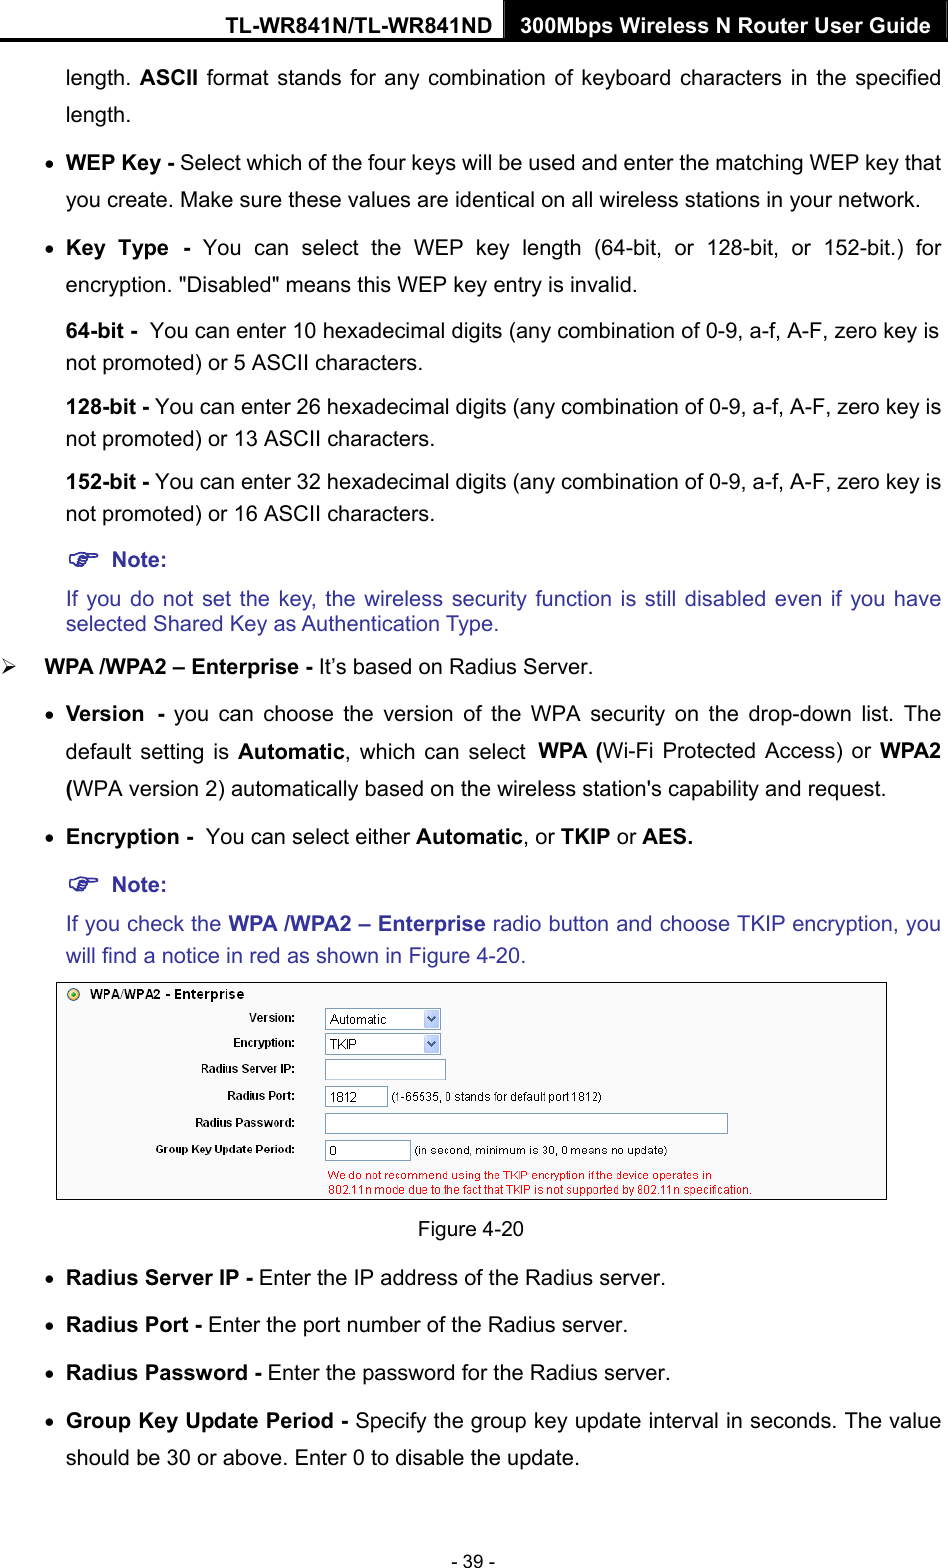 TL-WR841N/TL-WR841ND 300Mbps Wireless N Router User Guide - 39 - length. ASCII format stands for any combination of keyboard characters in the specified length.  • WEP Key - Select which of the four keys will be used and enter the matching WEP key that you create. Make sure these values are identical on all wireless stations in your network.   • Key Type - You can select the WEP key length (64-bit, or 128-bit, or 152-bit.) for encryption. &quot;Disabled&quot; means this WEP key entry is invalid. 64-bit - You can enter 10 hexadecimal digits (any combination of 0-9, a-f, A-F, zero key is not promoted) or 5 ASCII characters.   128-bit - You can enter 26 hexadecimal digits (any combination of 0-9, a-f, A-F, zero key is not promoted) or 13 ASCII characters.   152-bit - You can enter 32 hexadecimal digits (any combination of 0-9, a-f, A-F, zero key is not promoted) or 16 ASCII characters.   ) Note:  If you do not set the key, the wireless security function is still disabled even if you have selected Shared Key as Authentication Type.   ¾ WPA /WPA2 – Enterprise - It’s based on Radius Server. • Version - you can choose the version of the WPA security on the drop-down list. The default setting is Automatic, which can select WPA (Wi-Fi Protected Access) or WPA2 (WPA version 2) automatically based on the wireless station&apos;s capability and request. • Encryption - You can select either Automatic, or TKIP or AES. ) Note: If you check the WPA /WPA2 – Enterprise radio button and choose TKIP encryption, you will find a notice in red as shown in Figure 4-20.  Figure 4-20 • Radius Server IP - Enter the IP address of the Radius server. • Radius Port - Enter the port number of the Radius server. • Radius Password - Enter the password for the Radius server. • Group Key Update Period - Specify the group key update interval in seconds. The value should be 30 or above. Enter 0 to disable the update. 